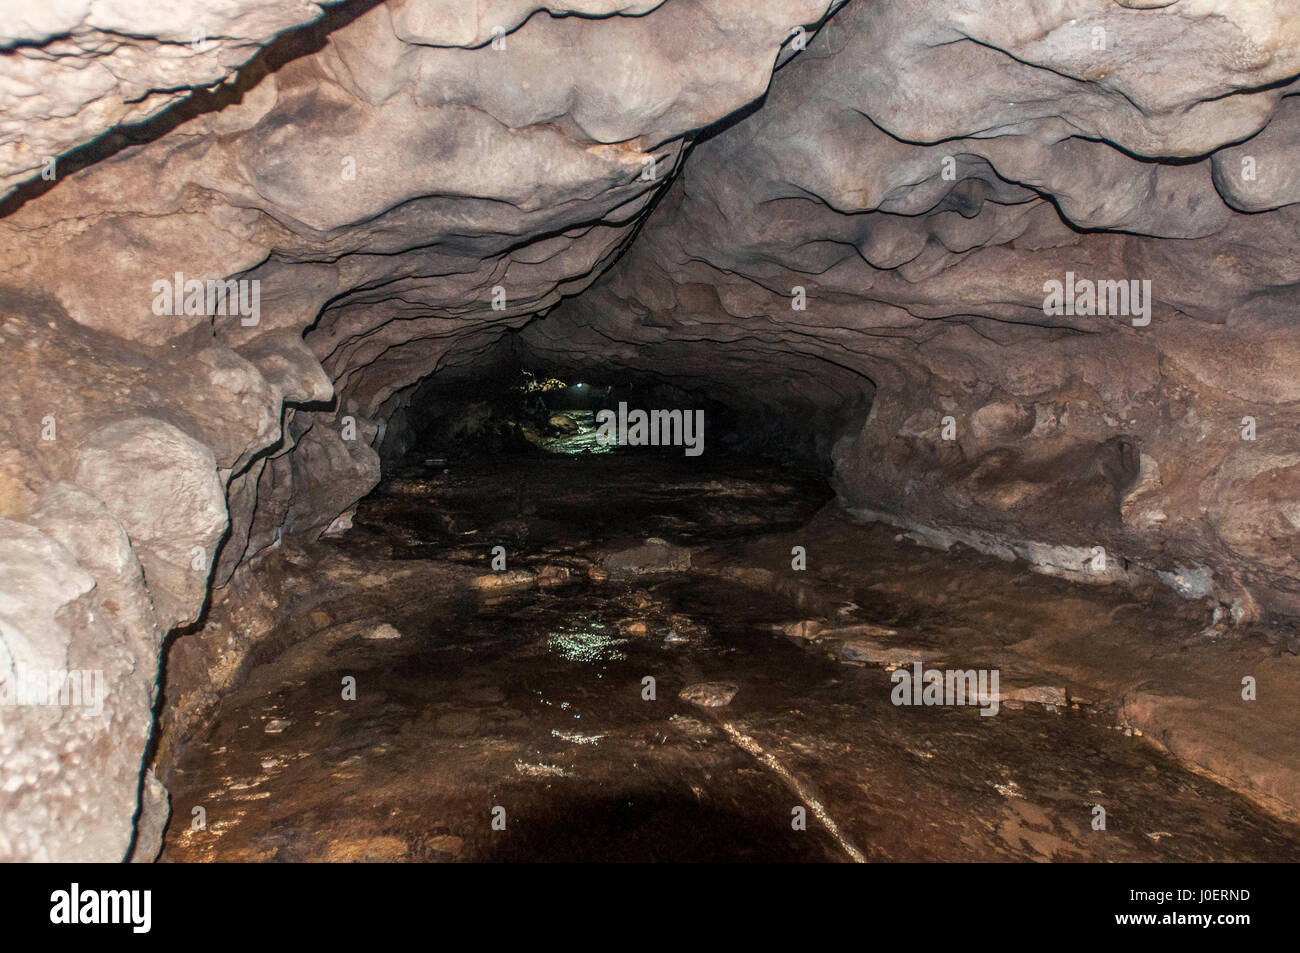 Treasure Trail continues in Monster's Lair at Mawsmai caves, Meghalaya -  Thrilling Travel